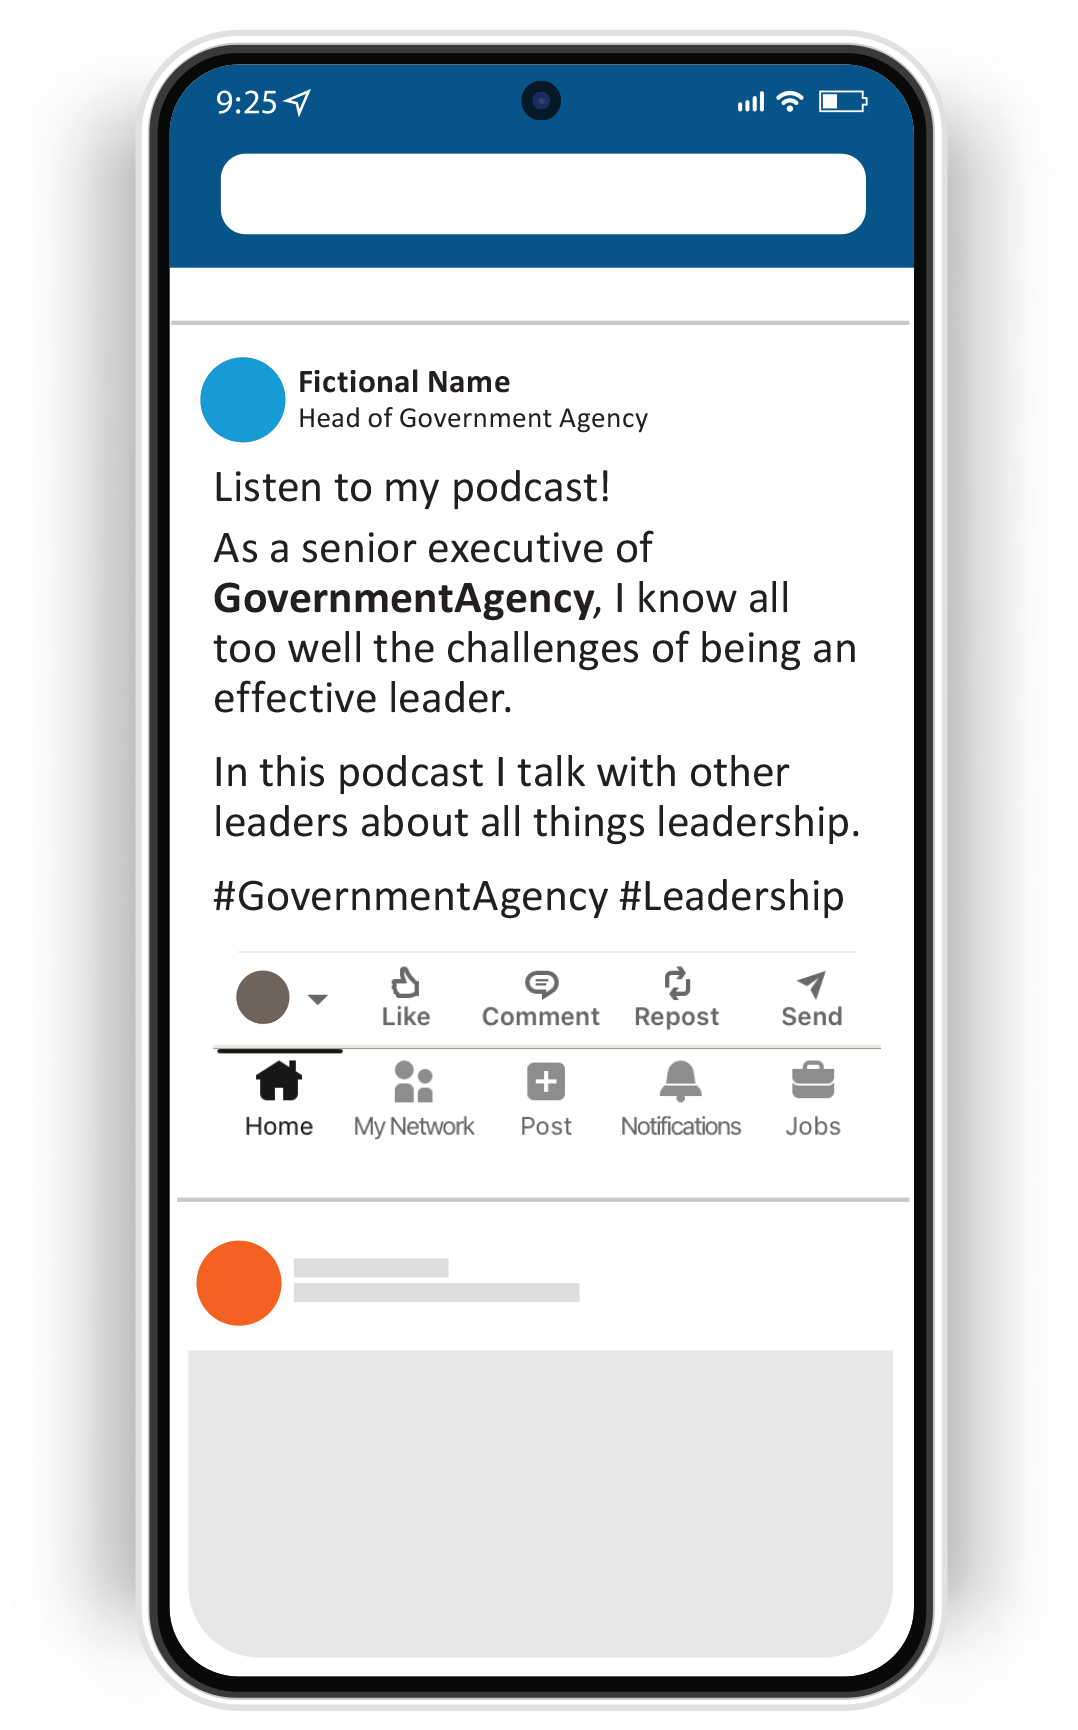 Iphone - As a senior executive of Government Agency, I know all too well the challenges of being an effective leader. In this podcast I talk with other leaders about all things leadership.